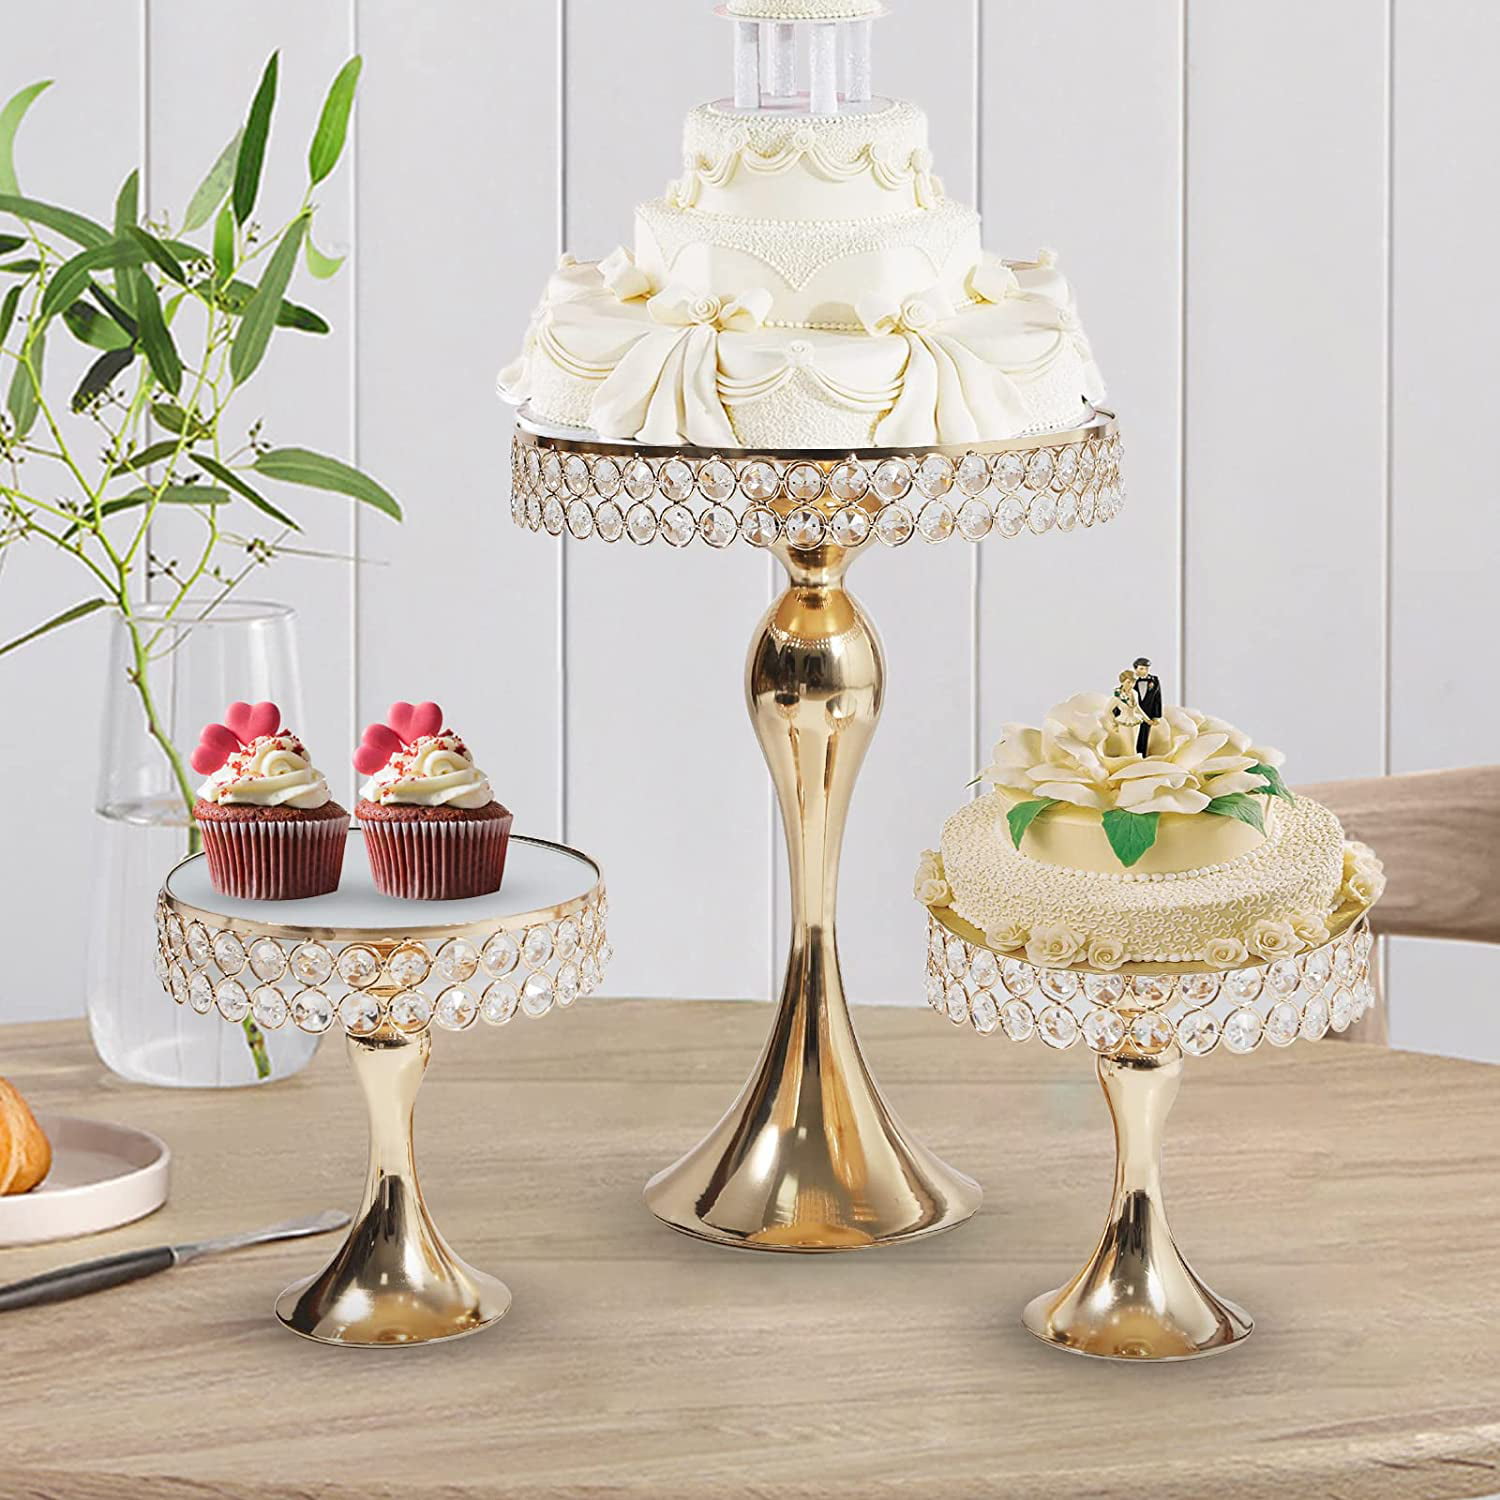 3pcs Cake Stand Crystal Round Cupcake Stands Metal Dessert Display Wedding Party 